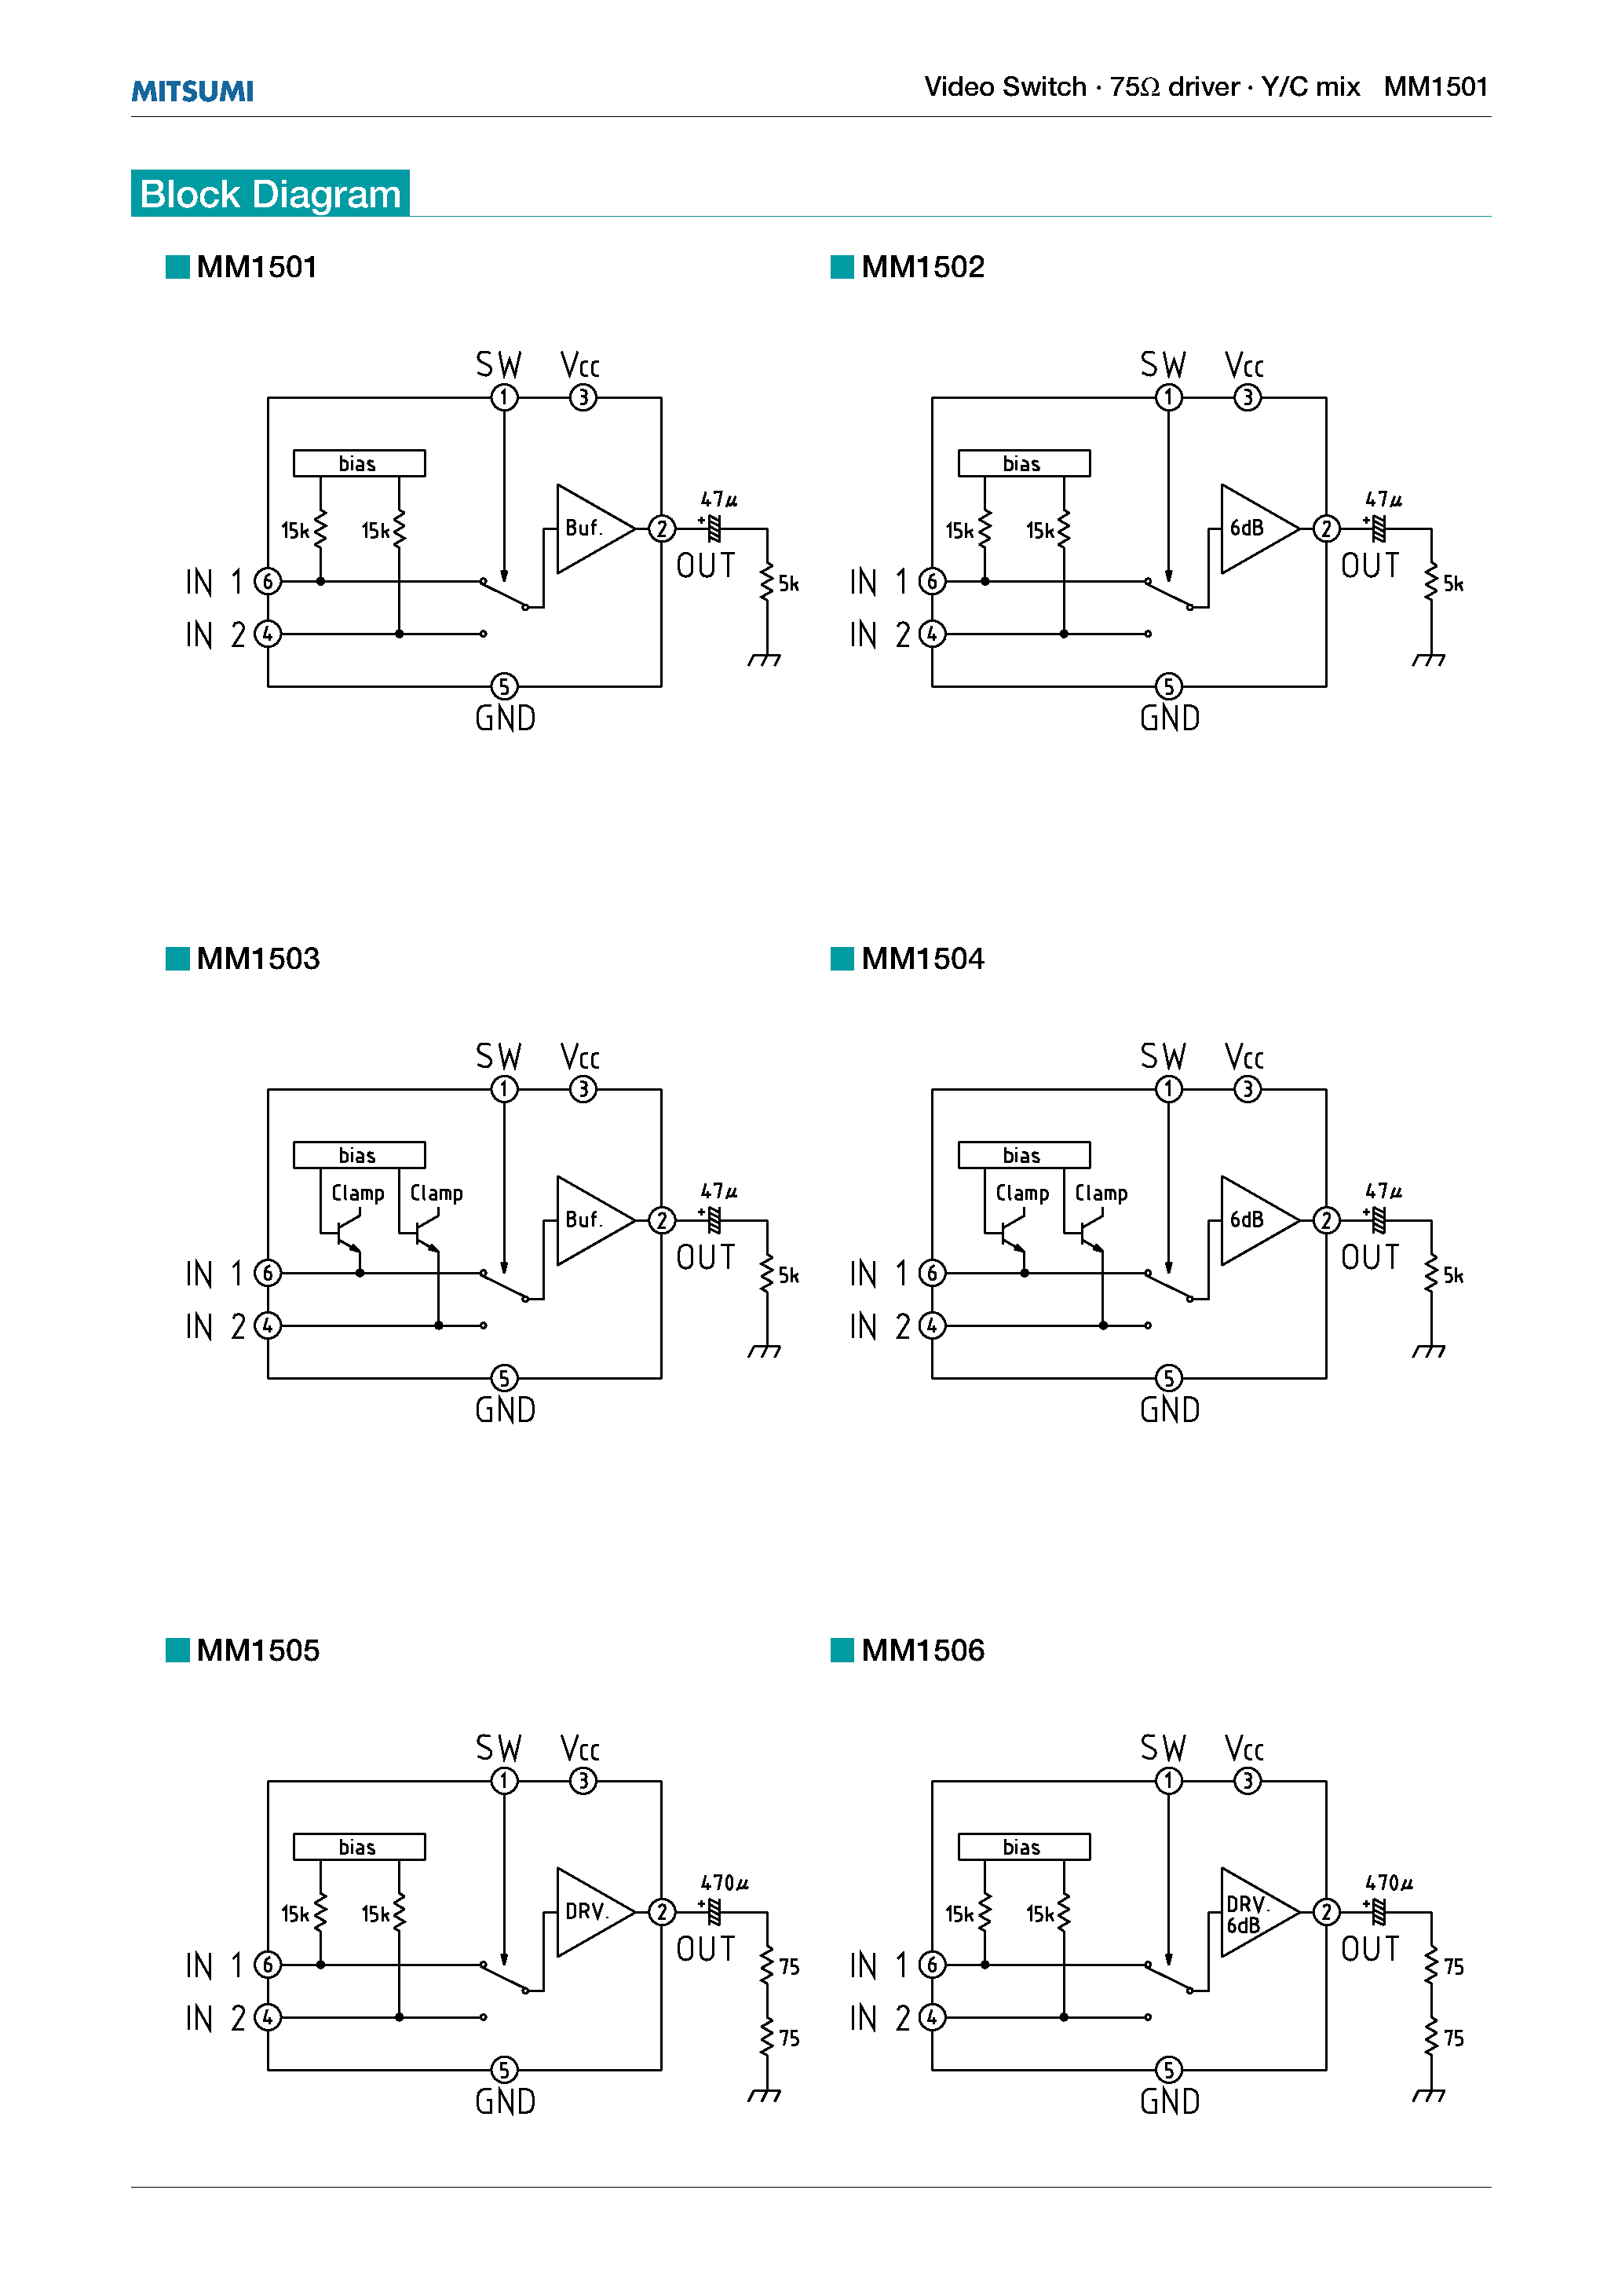 Datasheet MM1504 - Video Switch 75 driver Y/C mix page 2